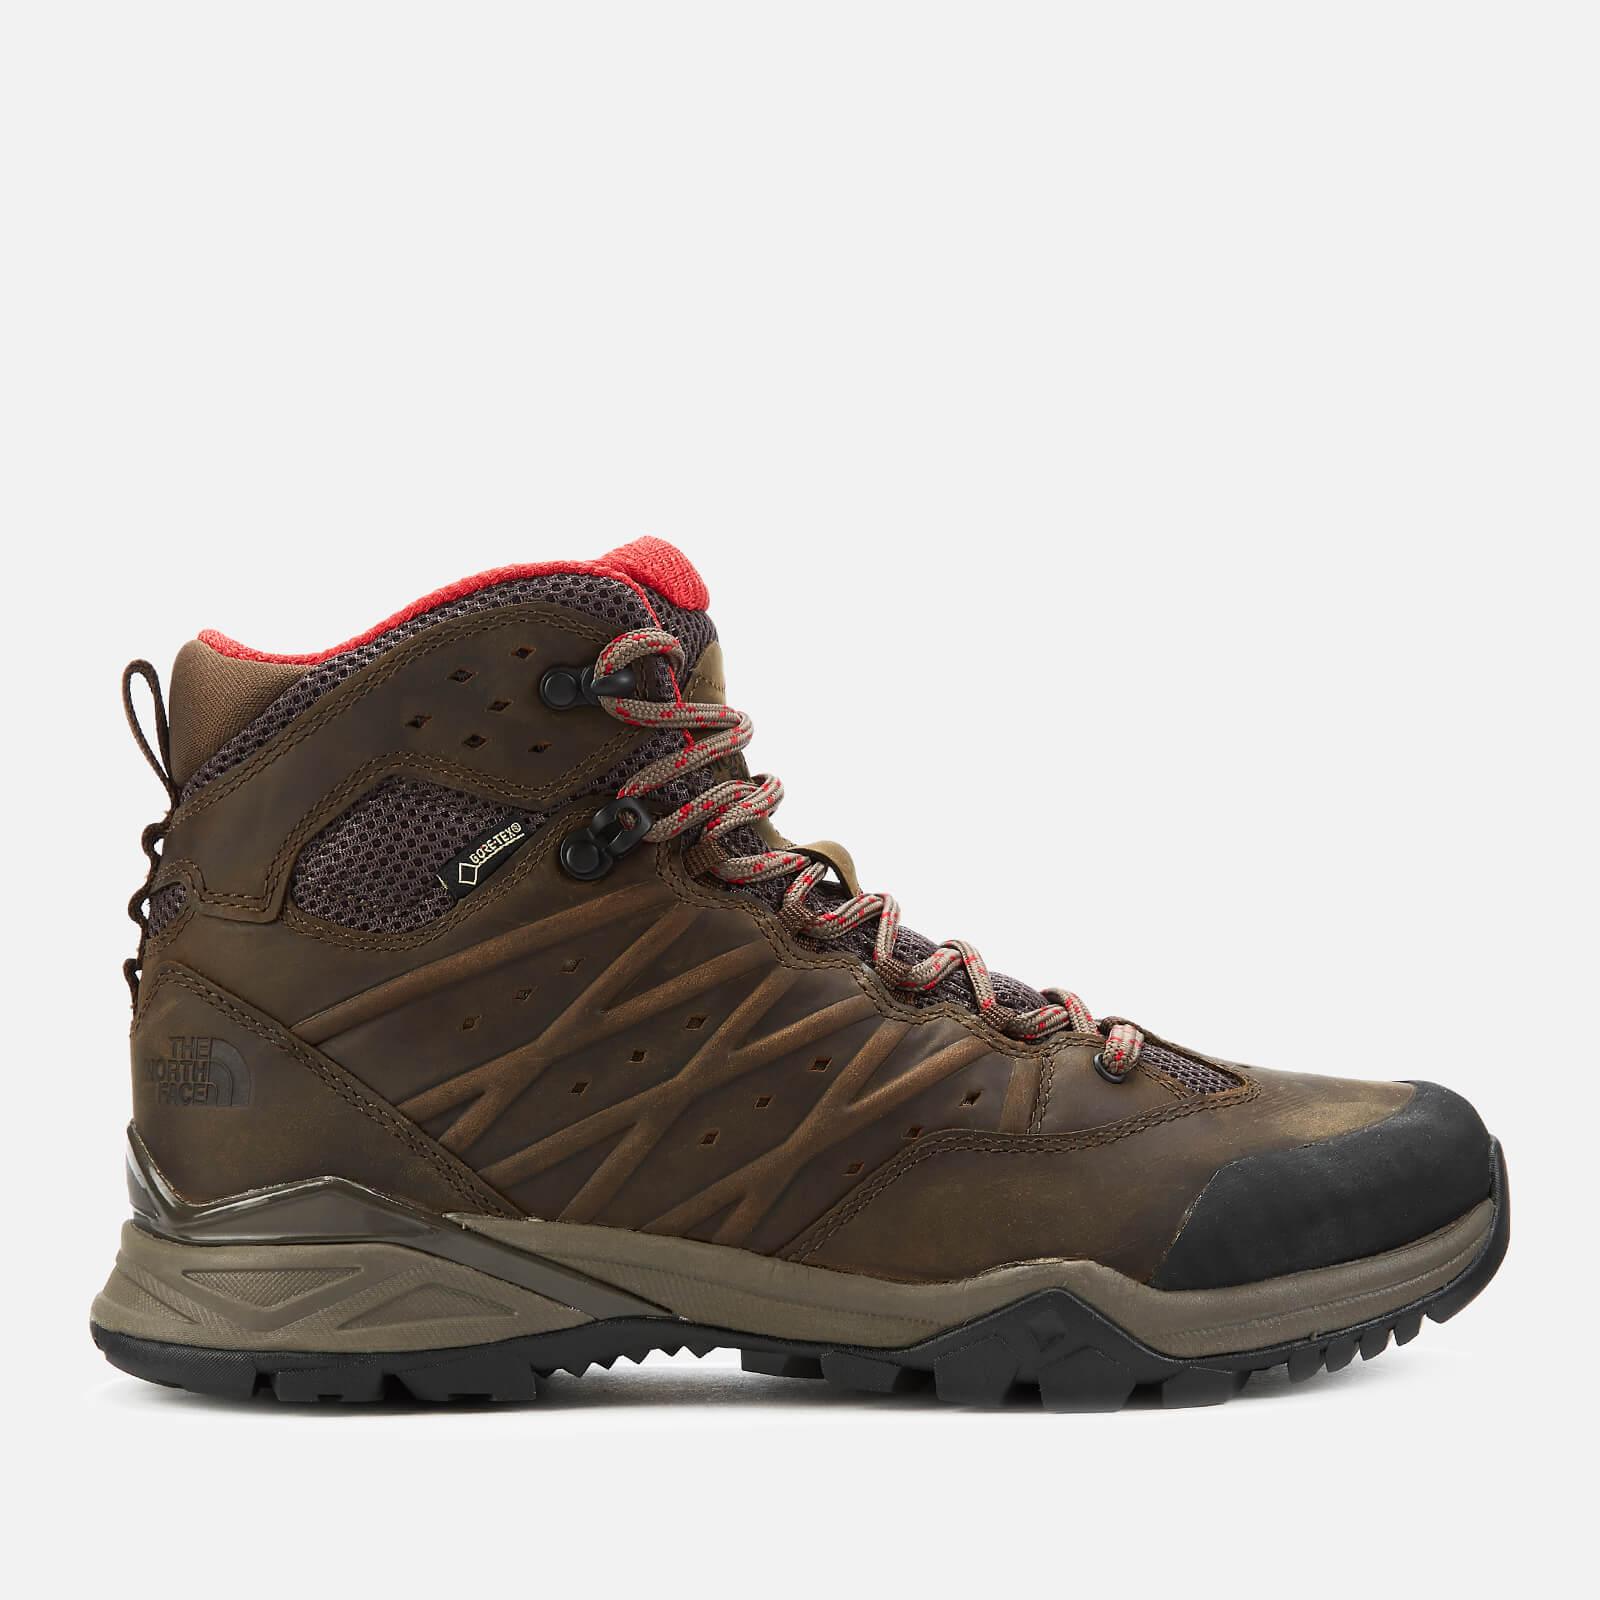 Lyst - The North Face Hedgehog Hike 2 Mid Goretex Trainers in Brown for Men